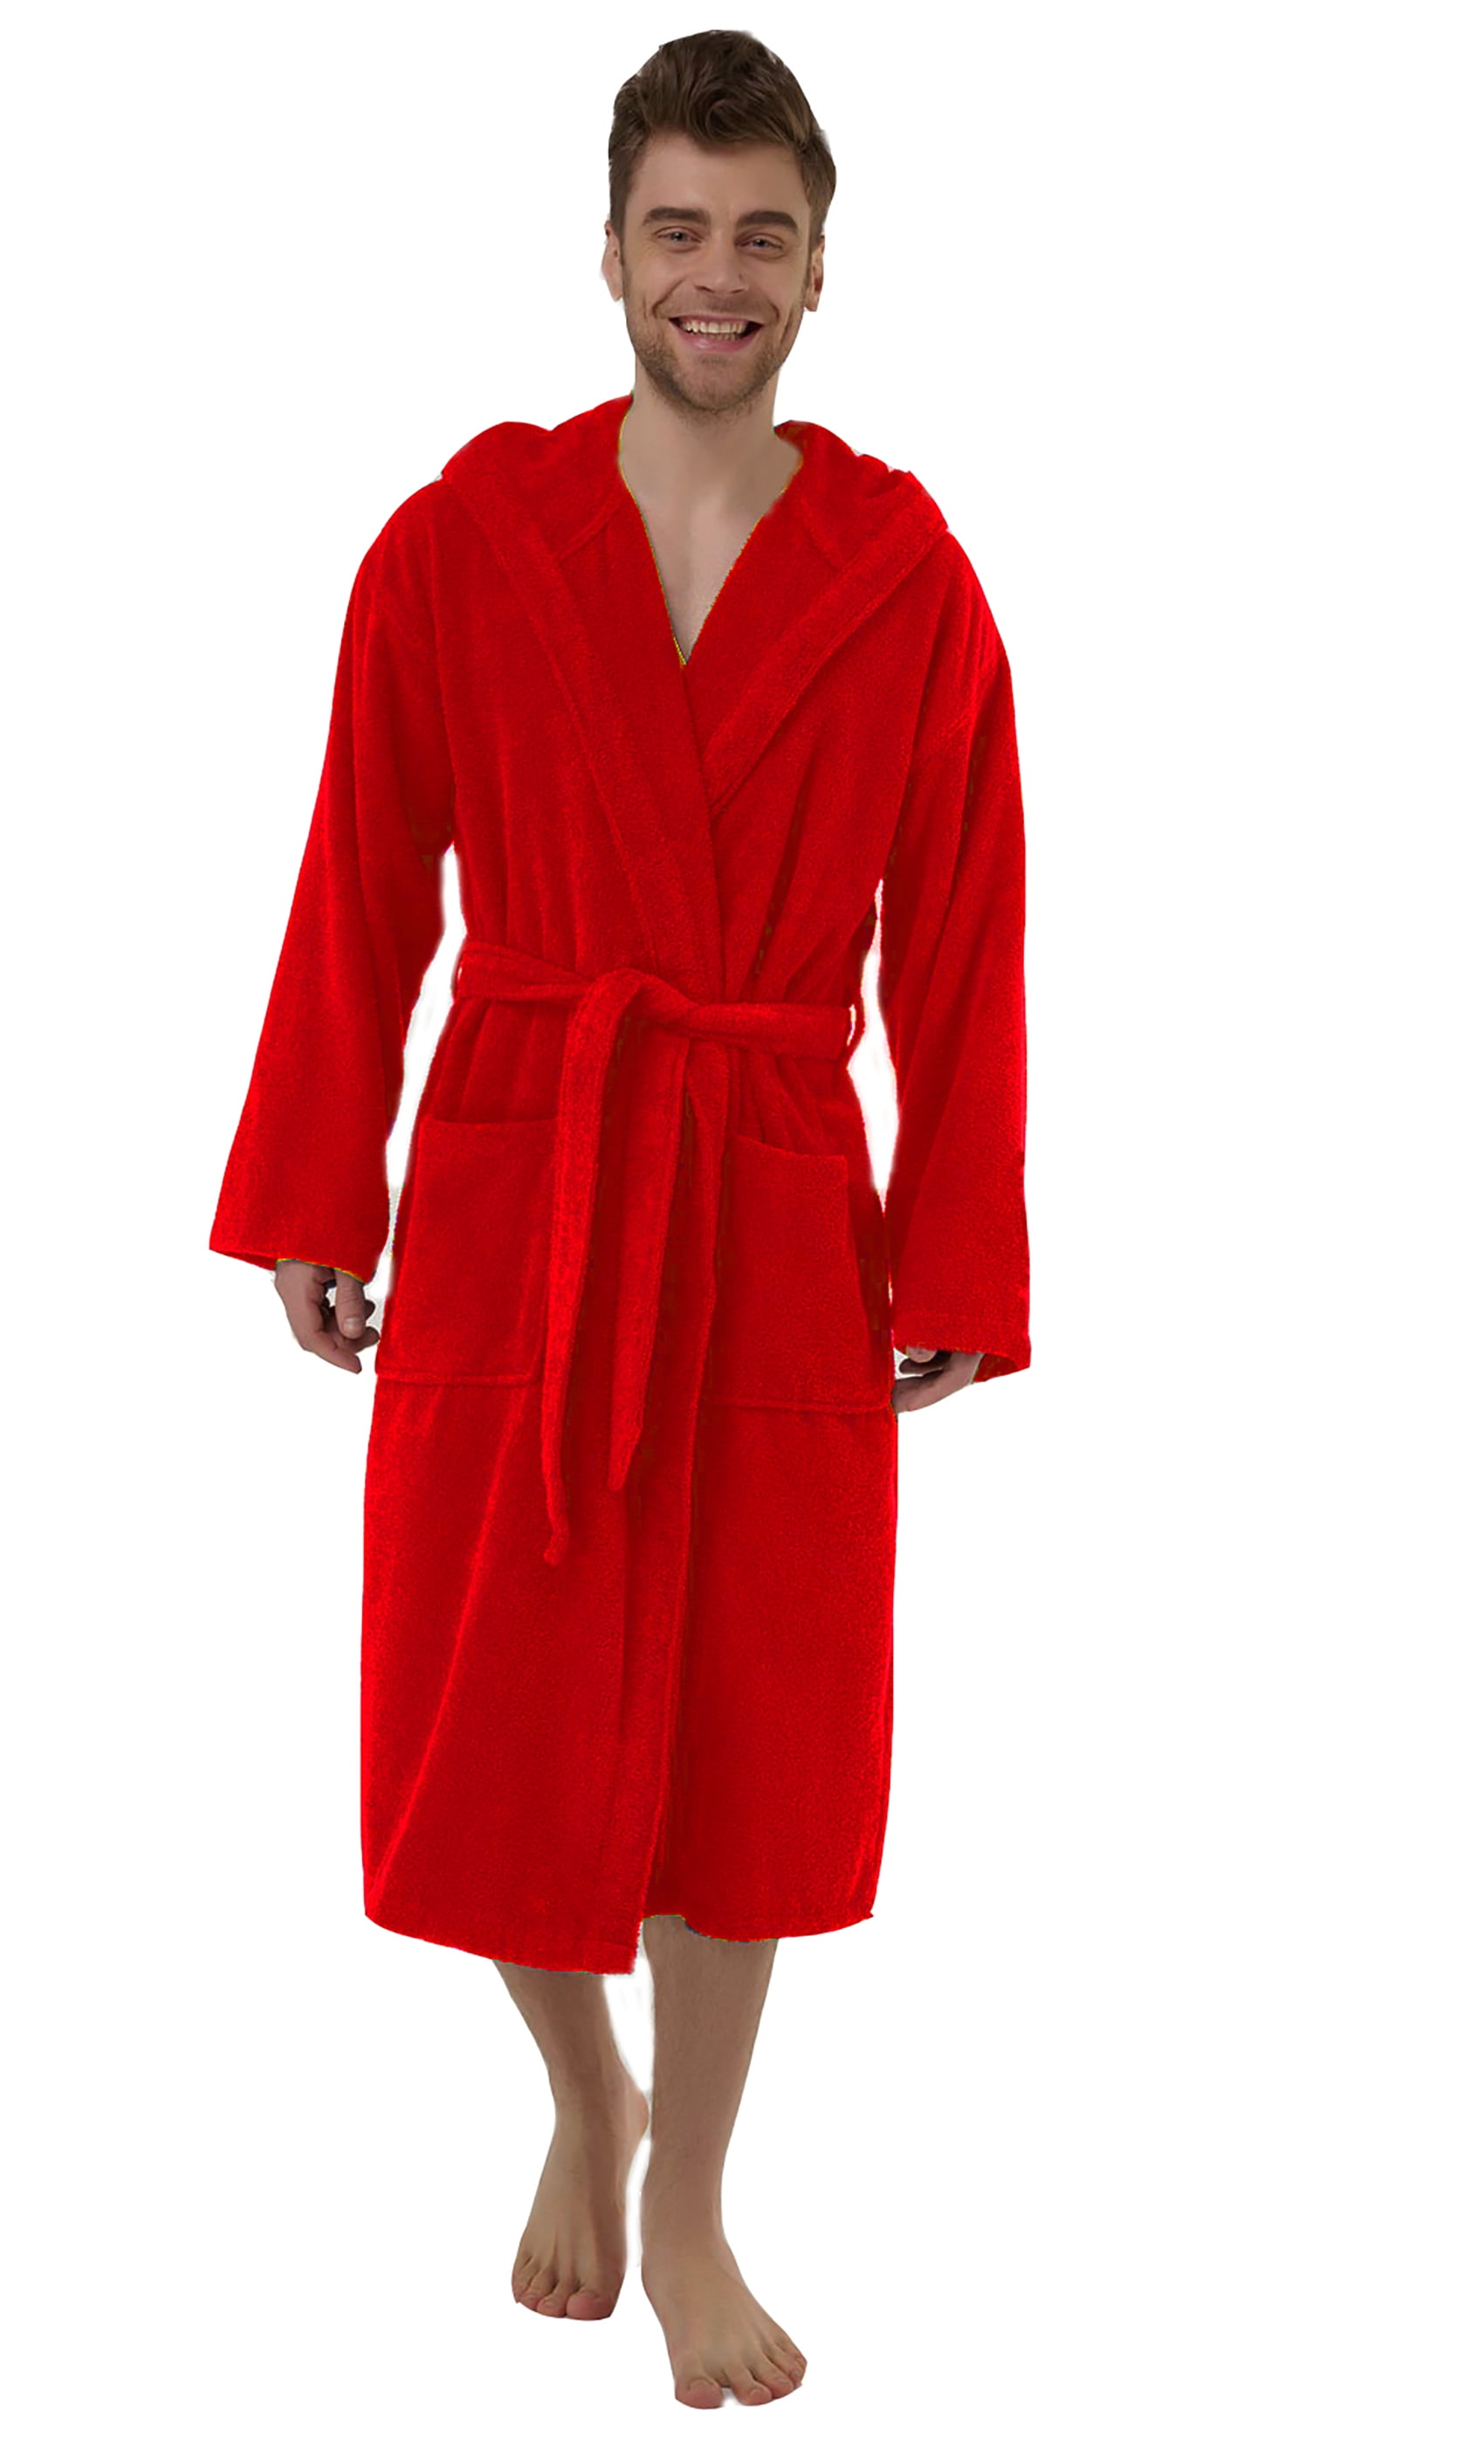 Spa & Resort Sales 100% Cotton Pure Cotton Red Terry Cloth Robe with Hood for Men, Fist most Medium, Large and XL Sizes. 